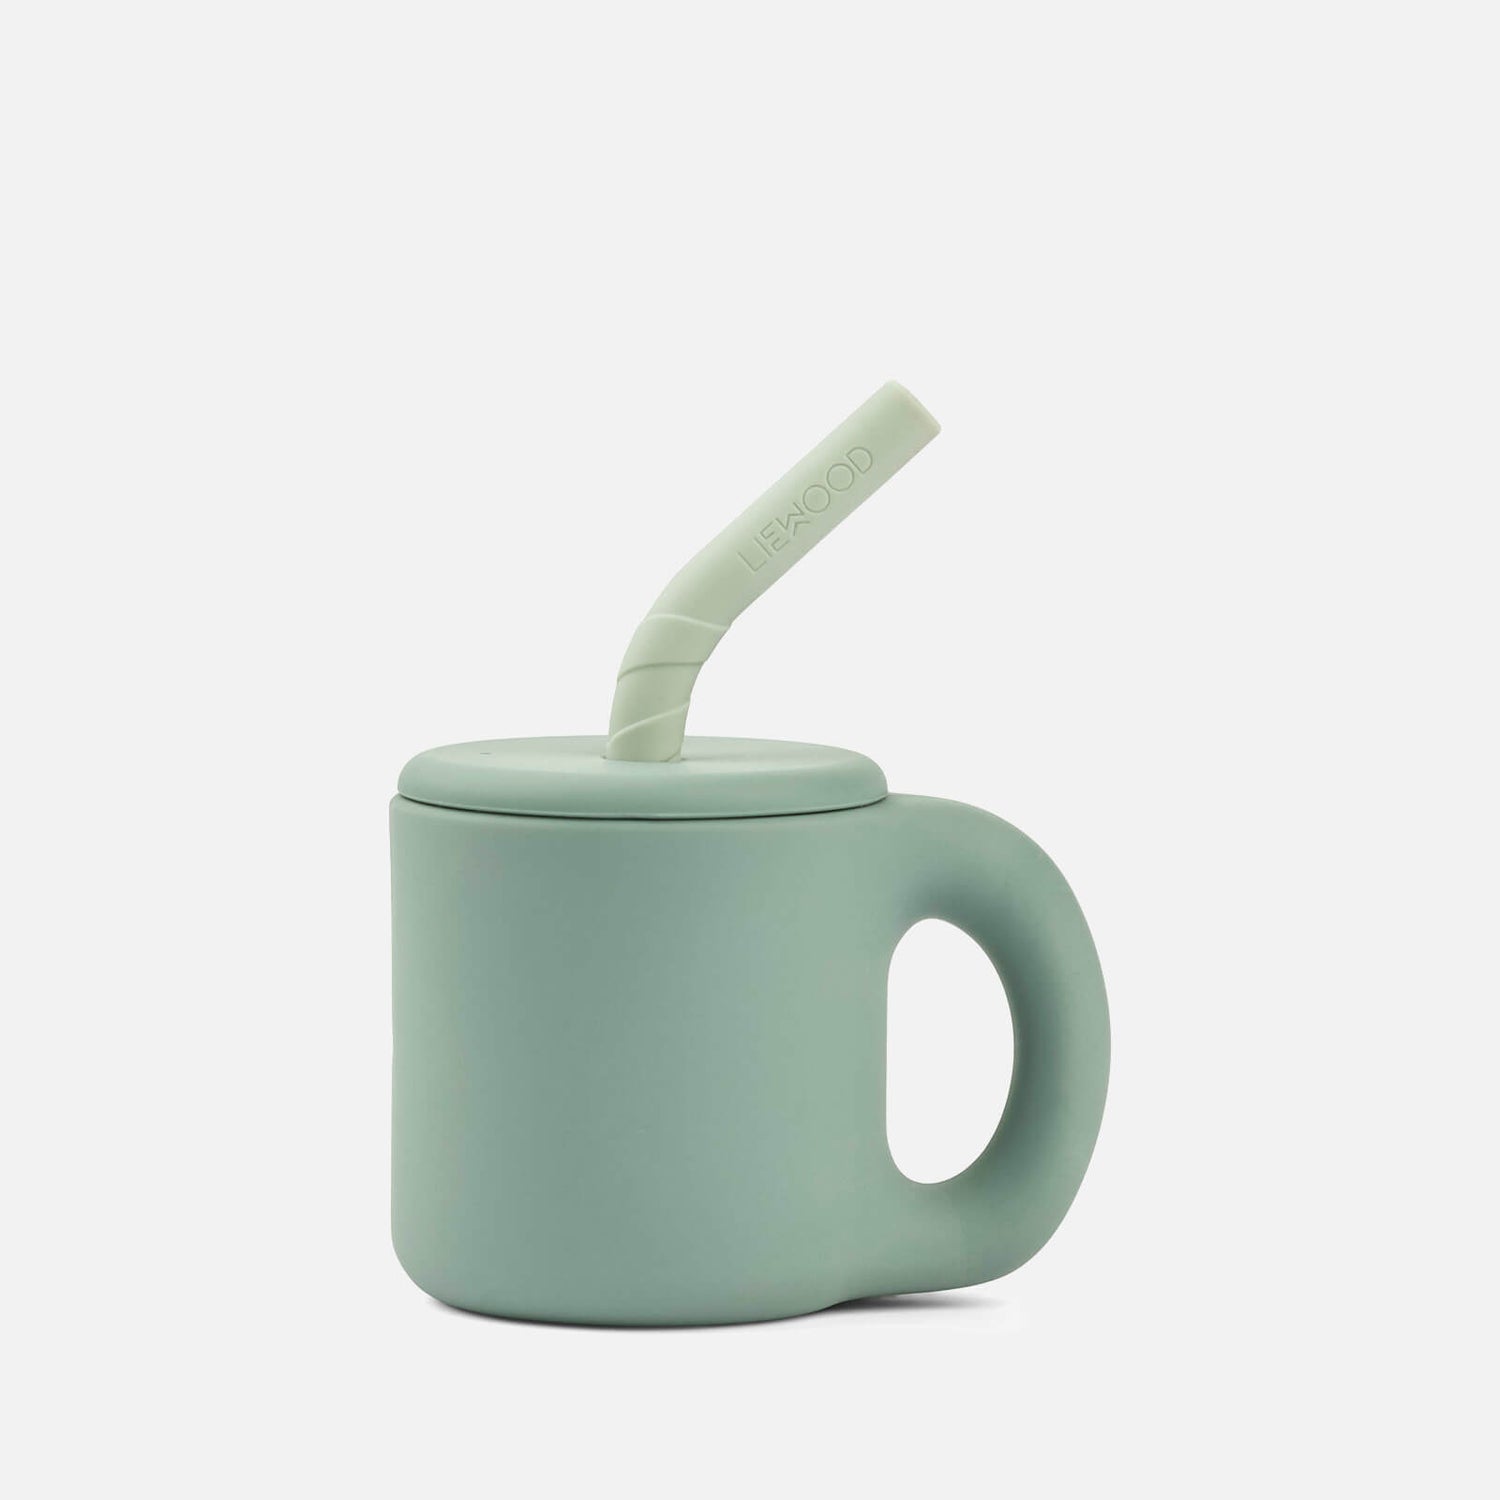 Liewood Jenna Cup with Straw - Dusty Mint/Peppermint